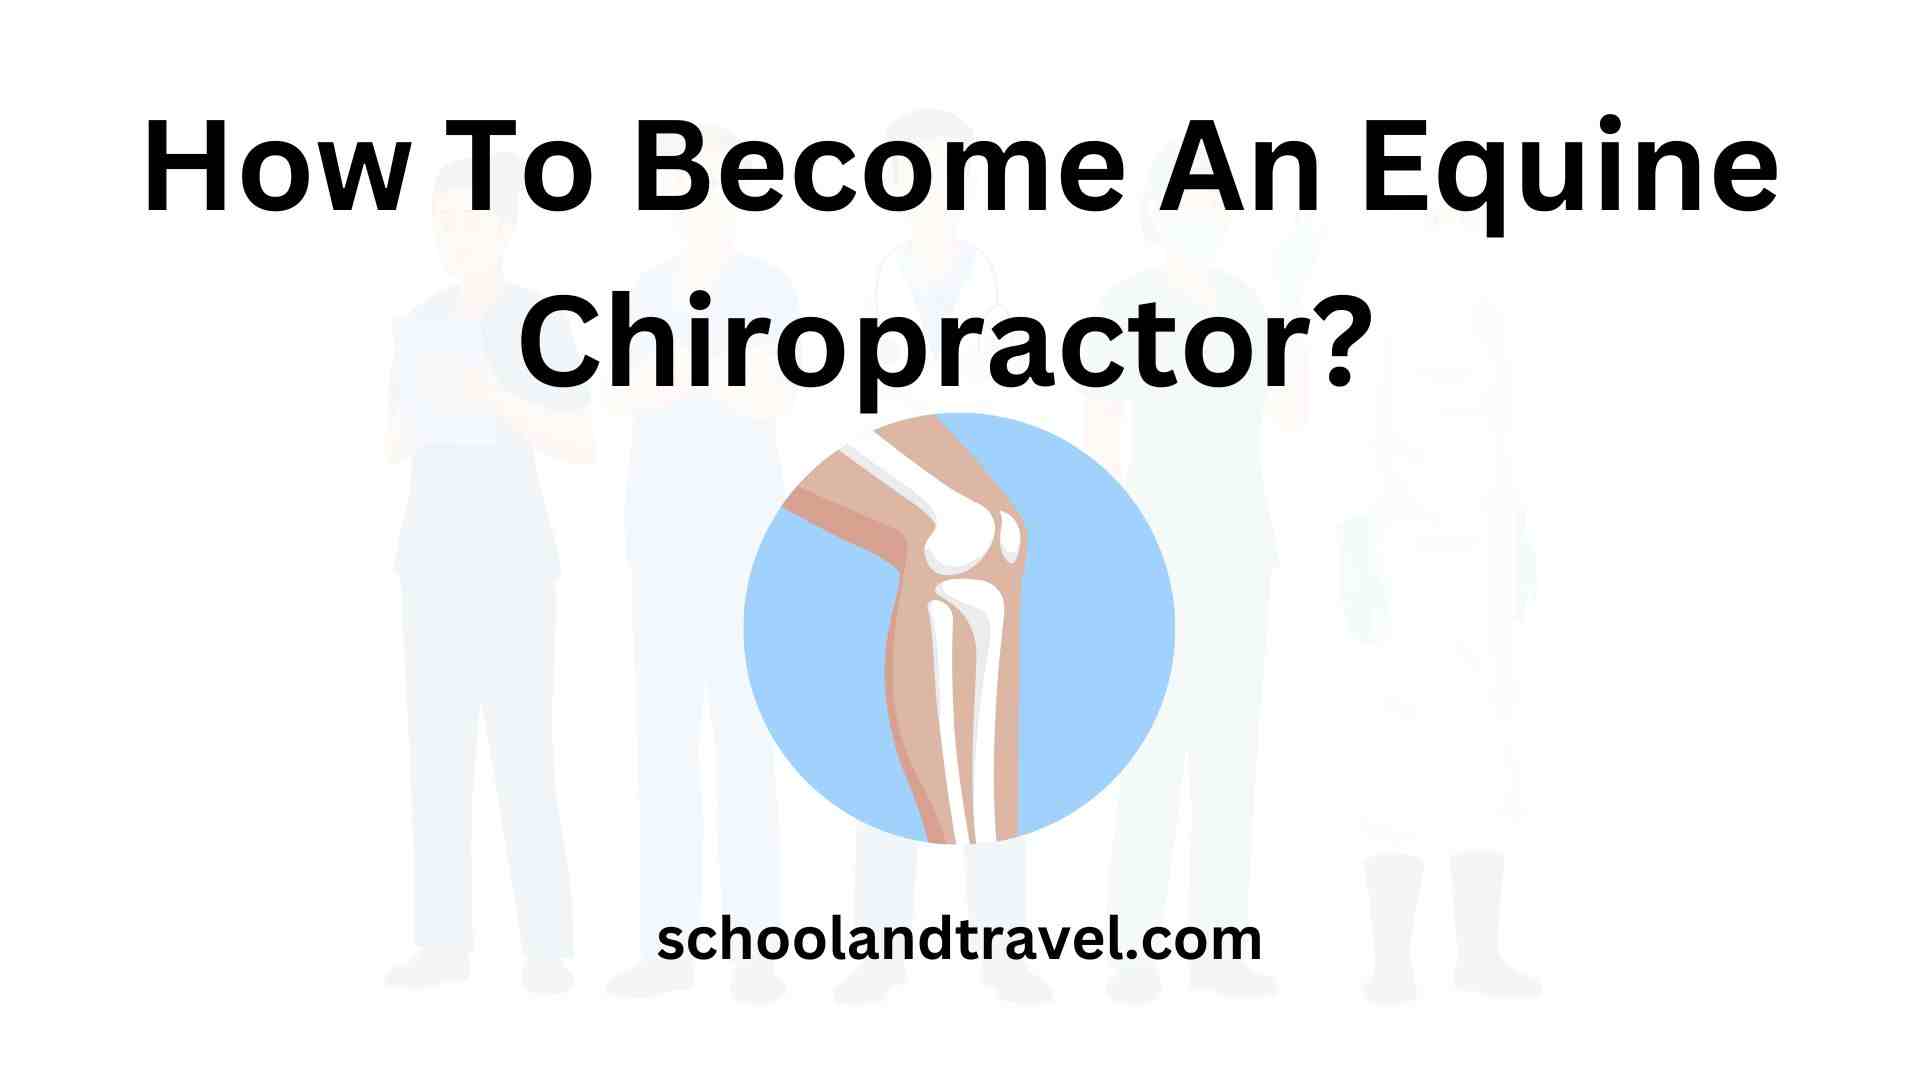 How To Become An Equine Chiropractor